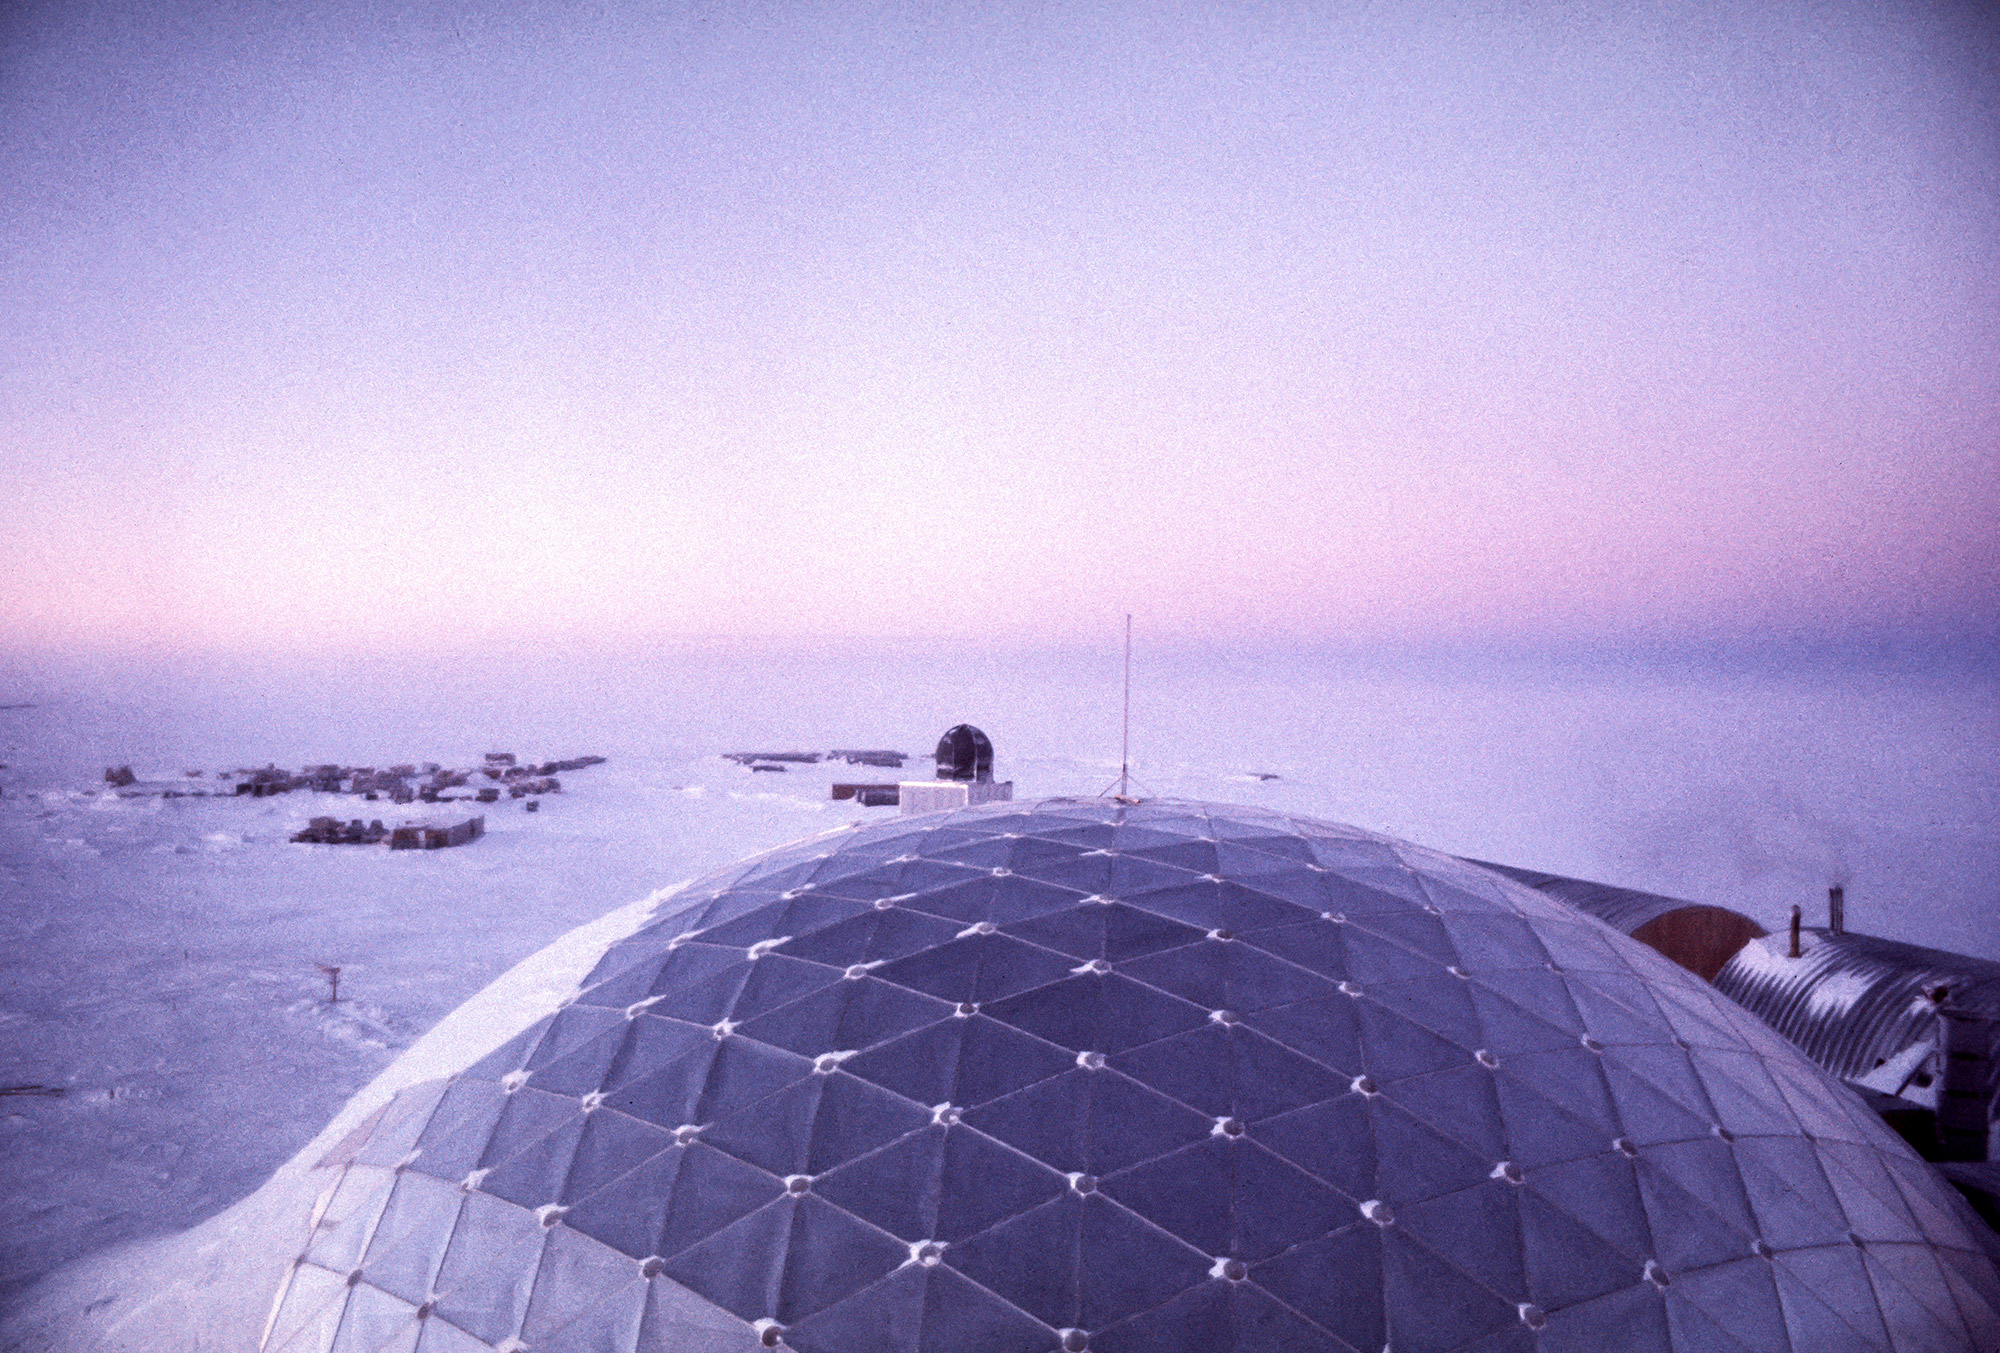 Sun-up at the South Pole